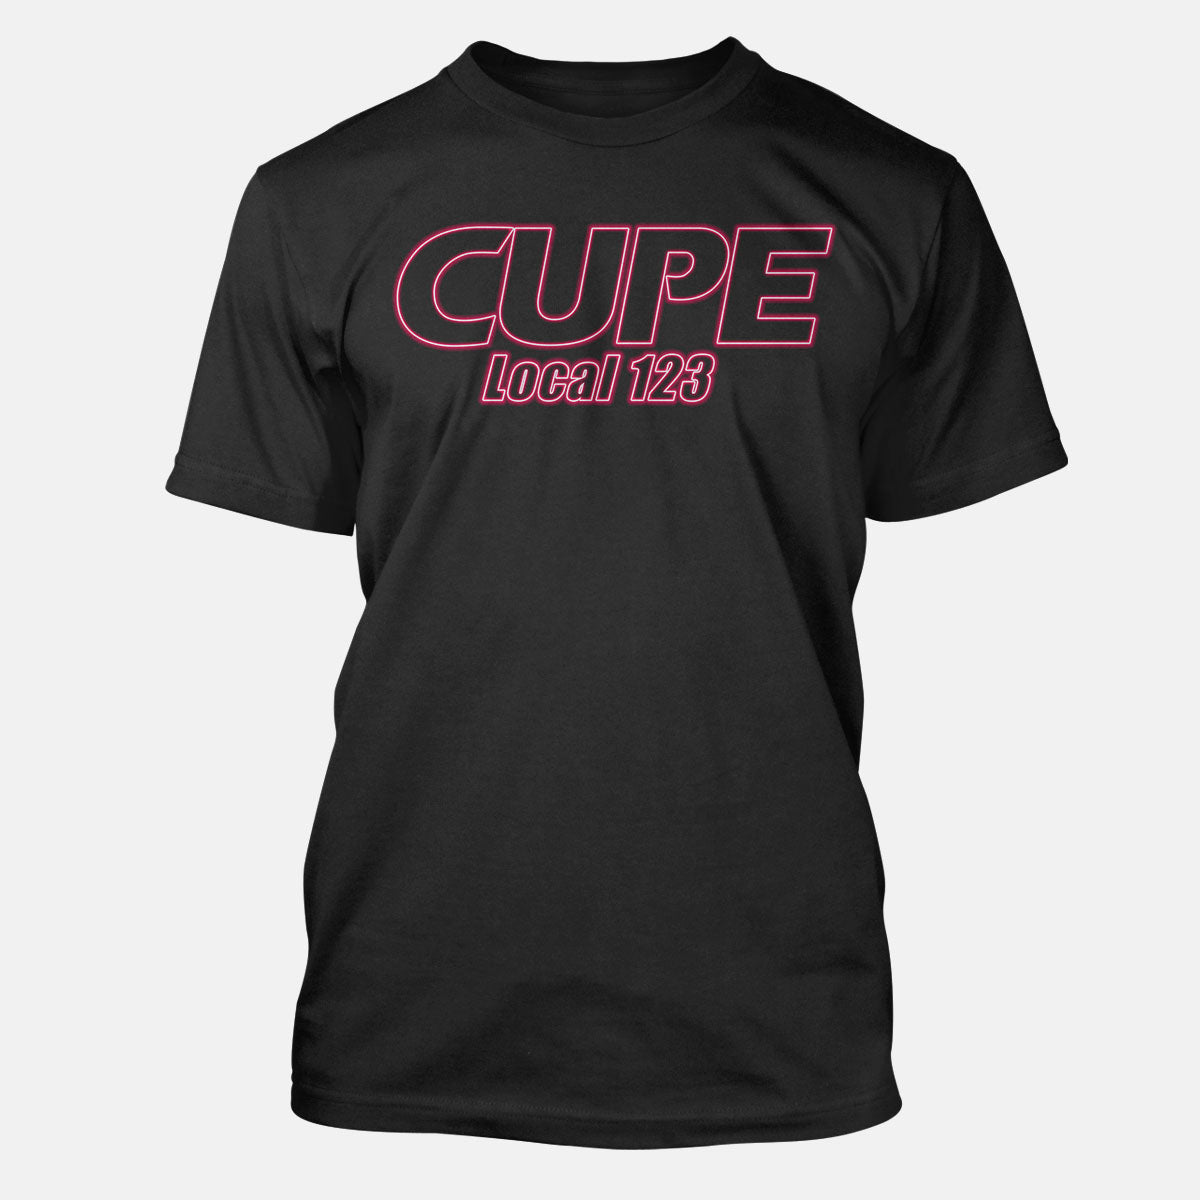 CUPE Pink Glow Apparel